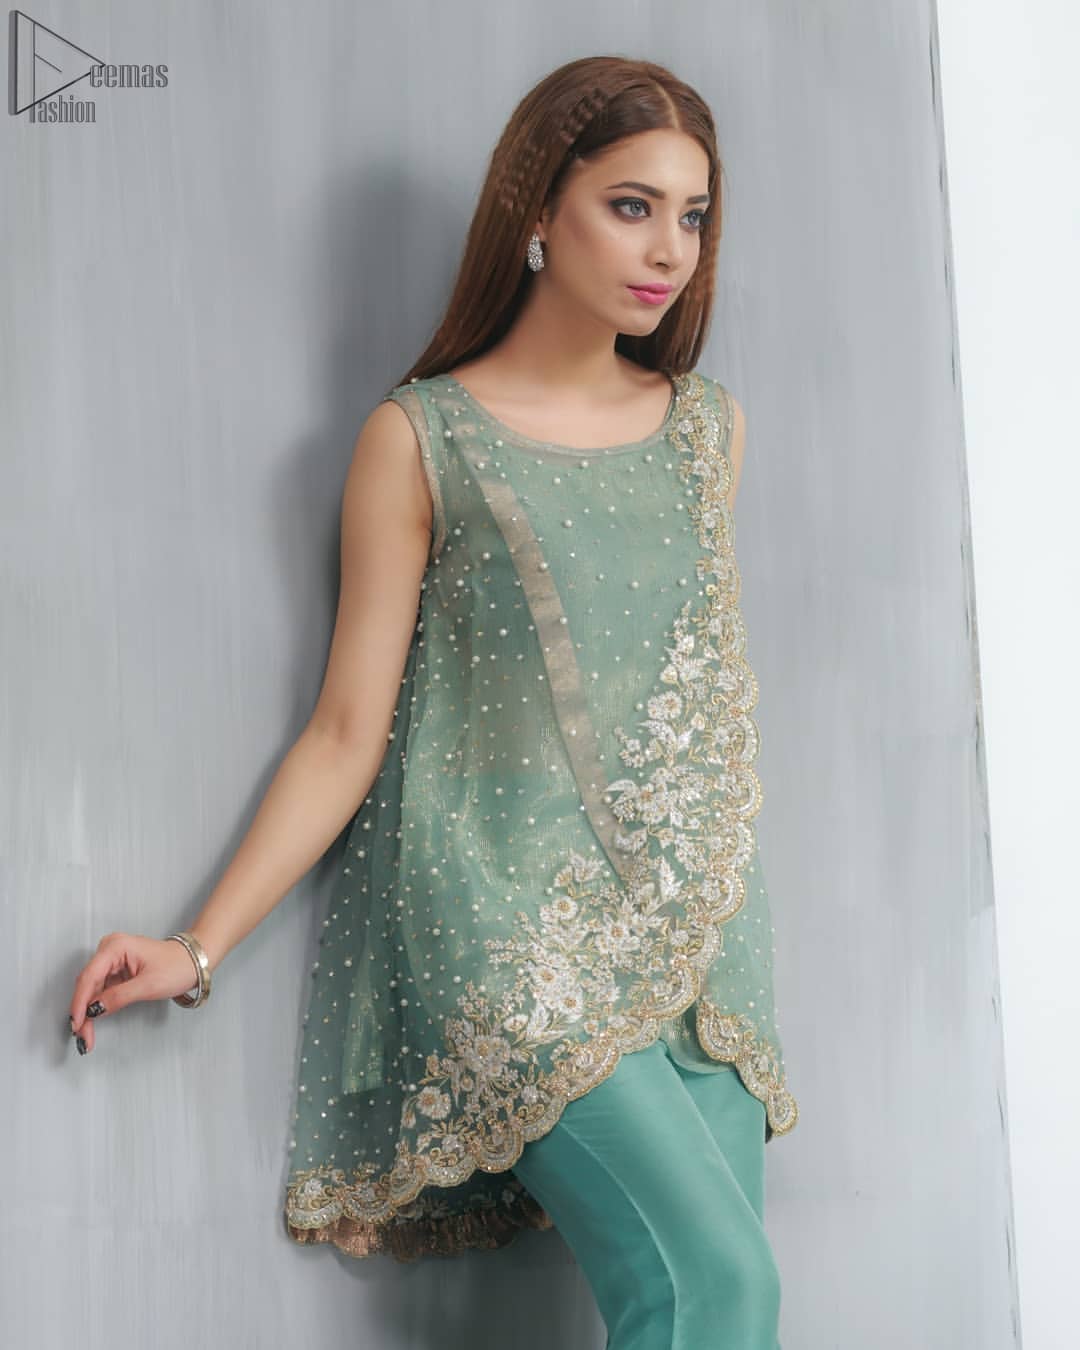 This outfit should be the next addition to your wardrobe. Gussy up the glamour with this intricately embroidered Sea Green ensemble accentuated with floral motifs and finished with scalp borders. An example of beauty and elegance. Look breathtakingly stylish in this embroidered regalia furnished. 